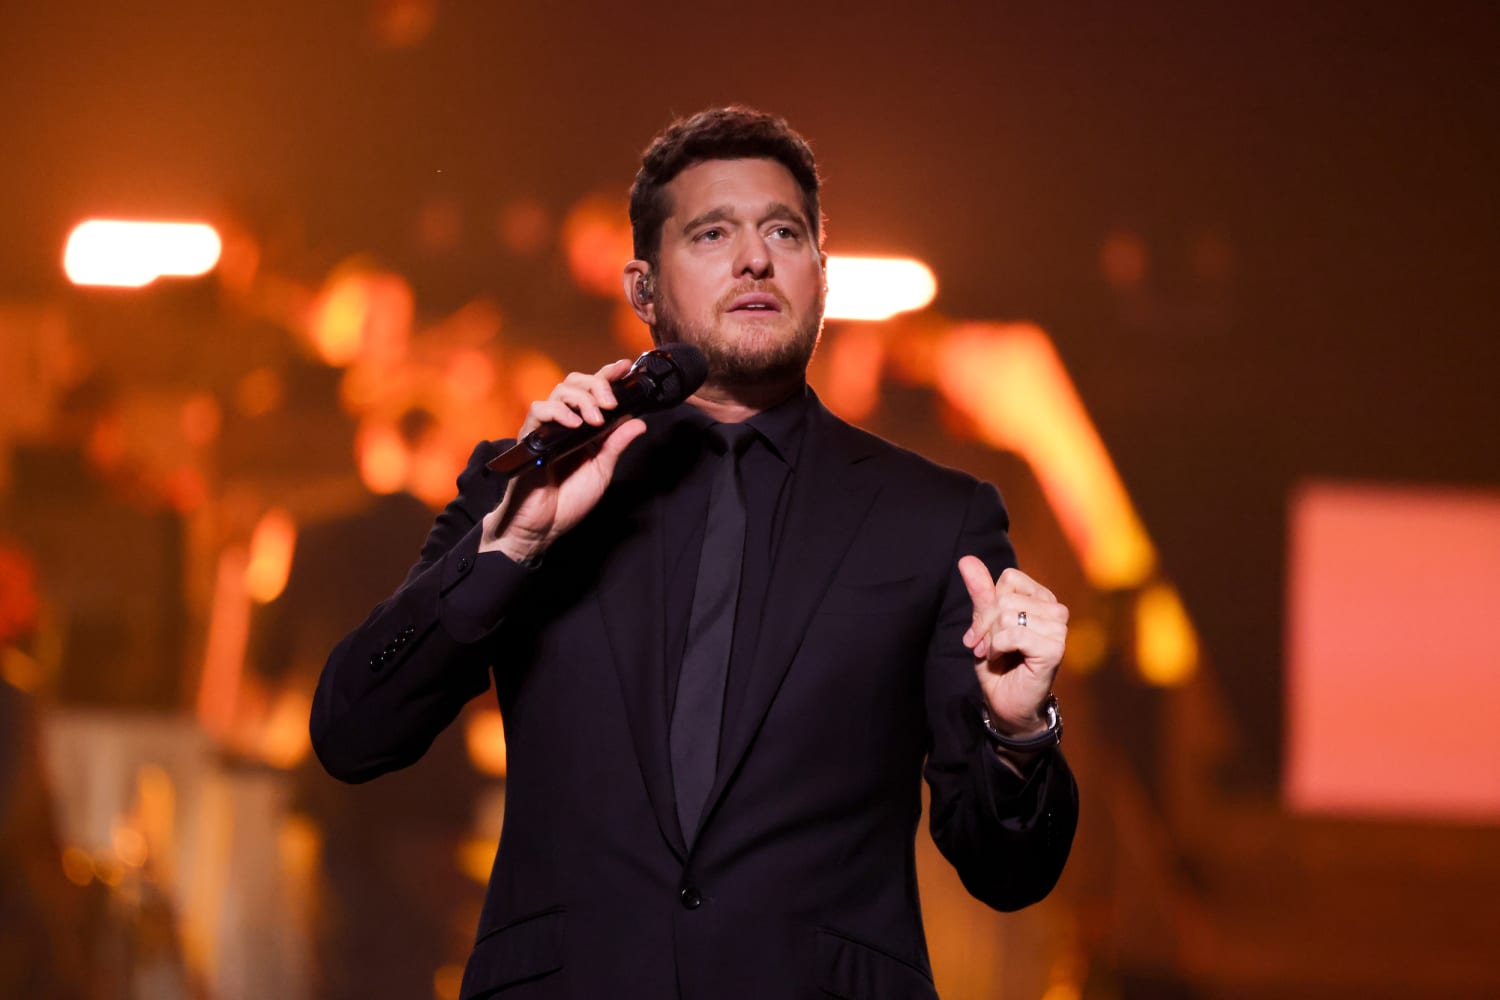 Michael Bublé reveals the promise he made himself amid son's cancer diagnosis